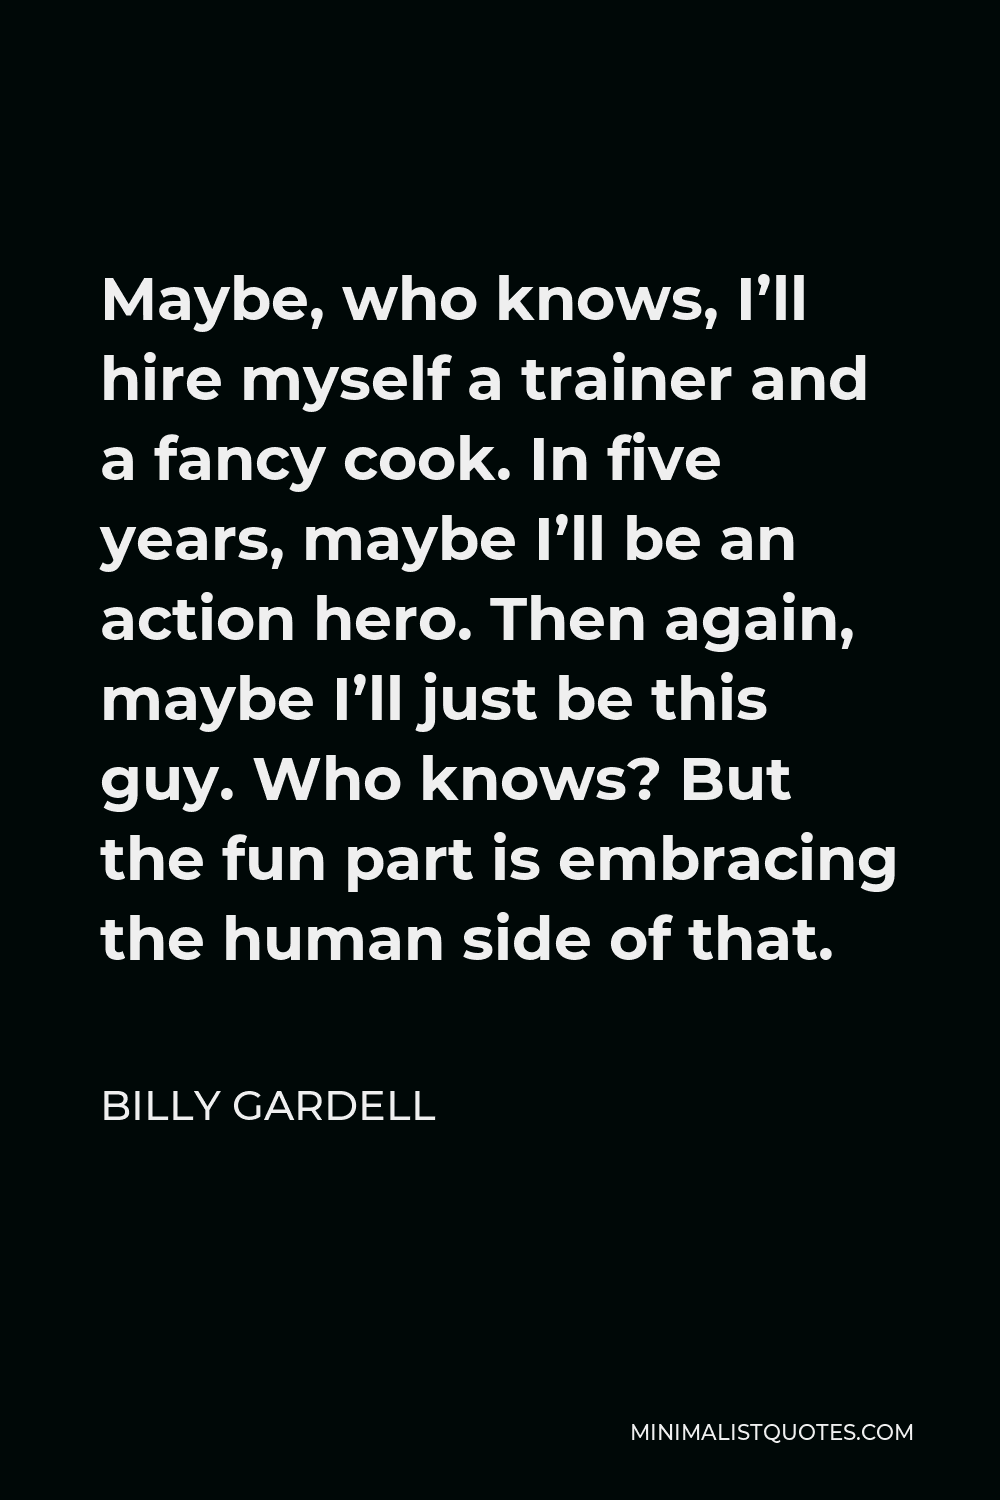 Billy Gardell Quote - Maybe, who knows, I’ll hire myself a trainer and a fancy cook. In five years, maybe I’ll be an action hero. Then again, maybe I’ll just be this guy. Who knows? But the fun part is embracing the human side of that.